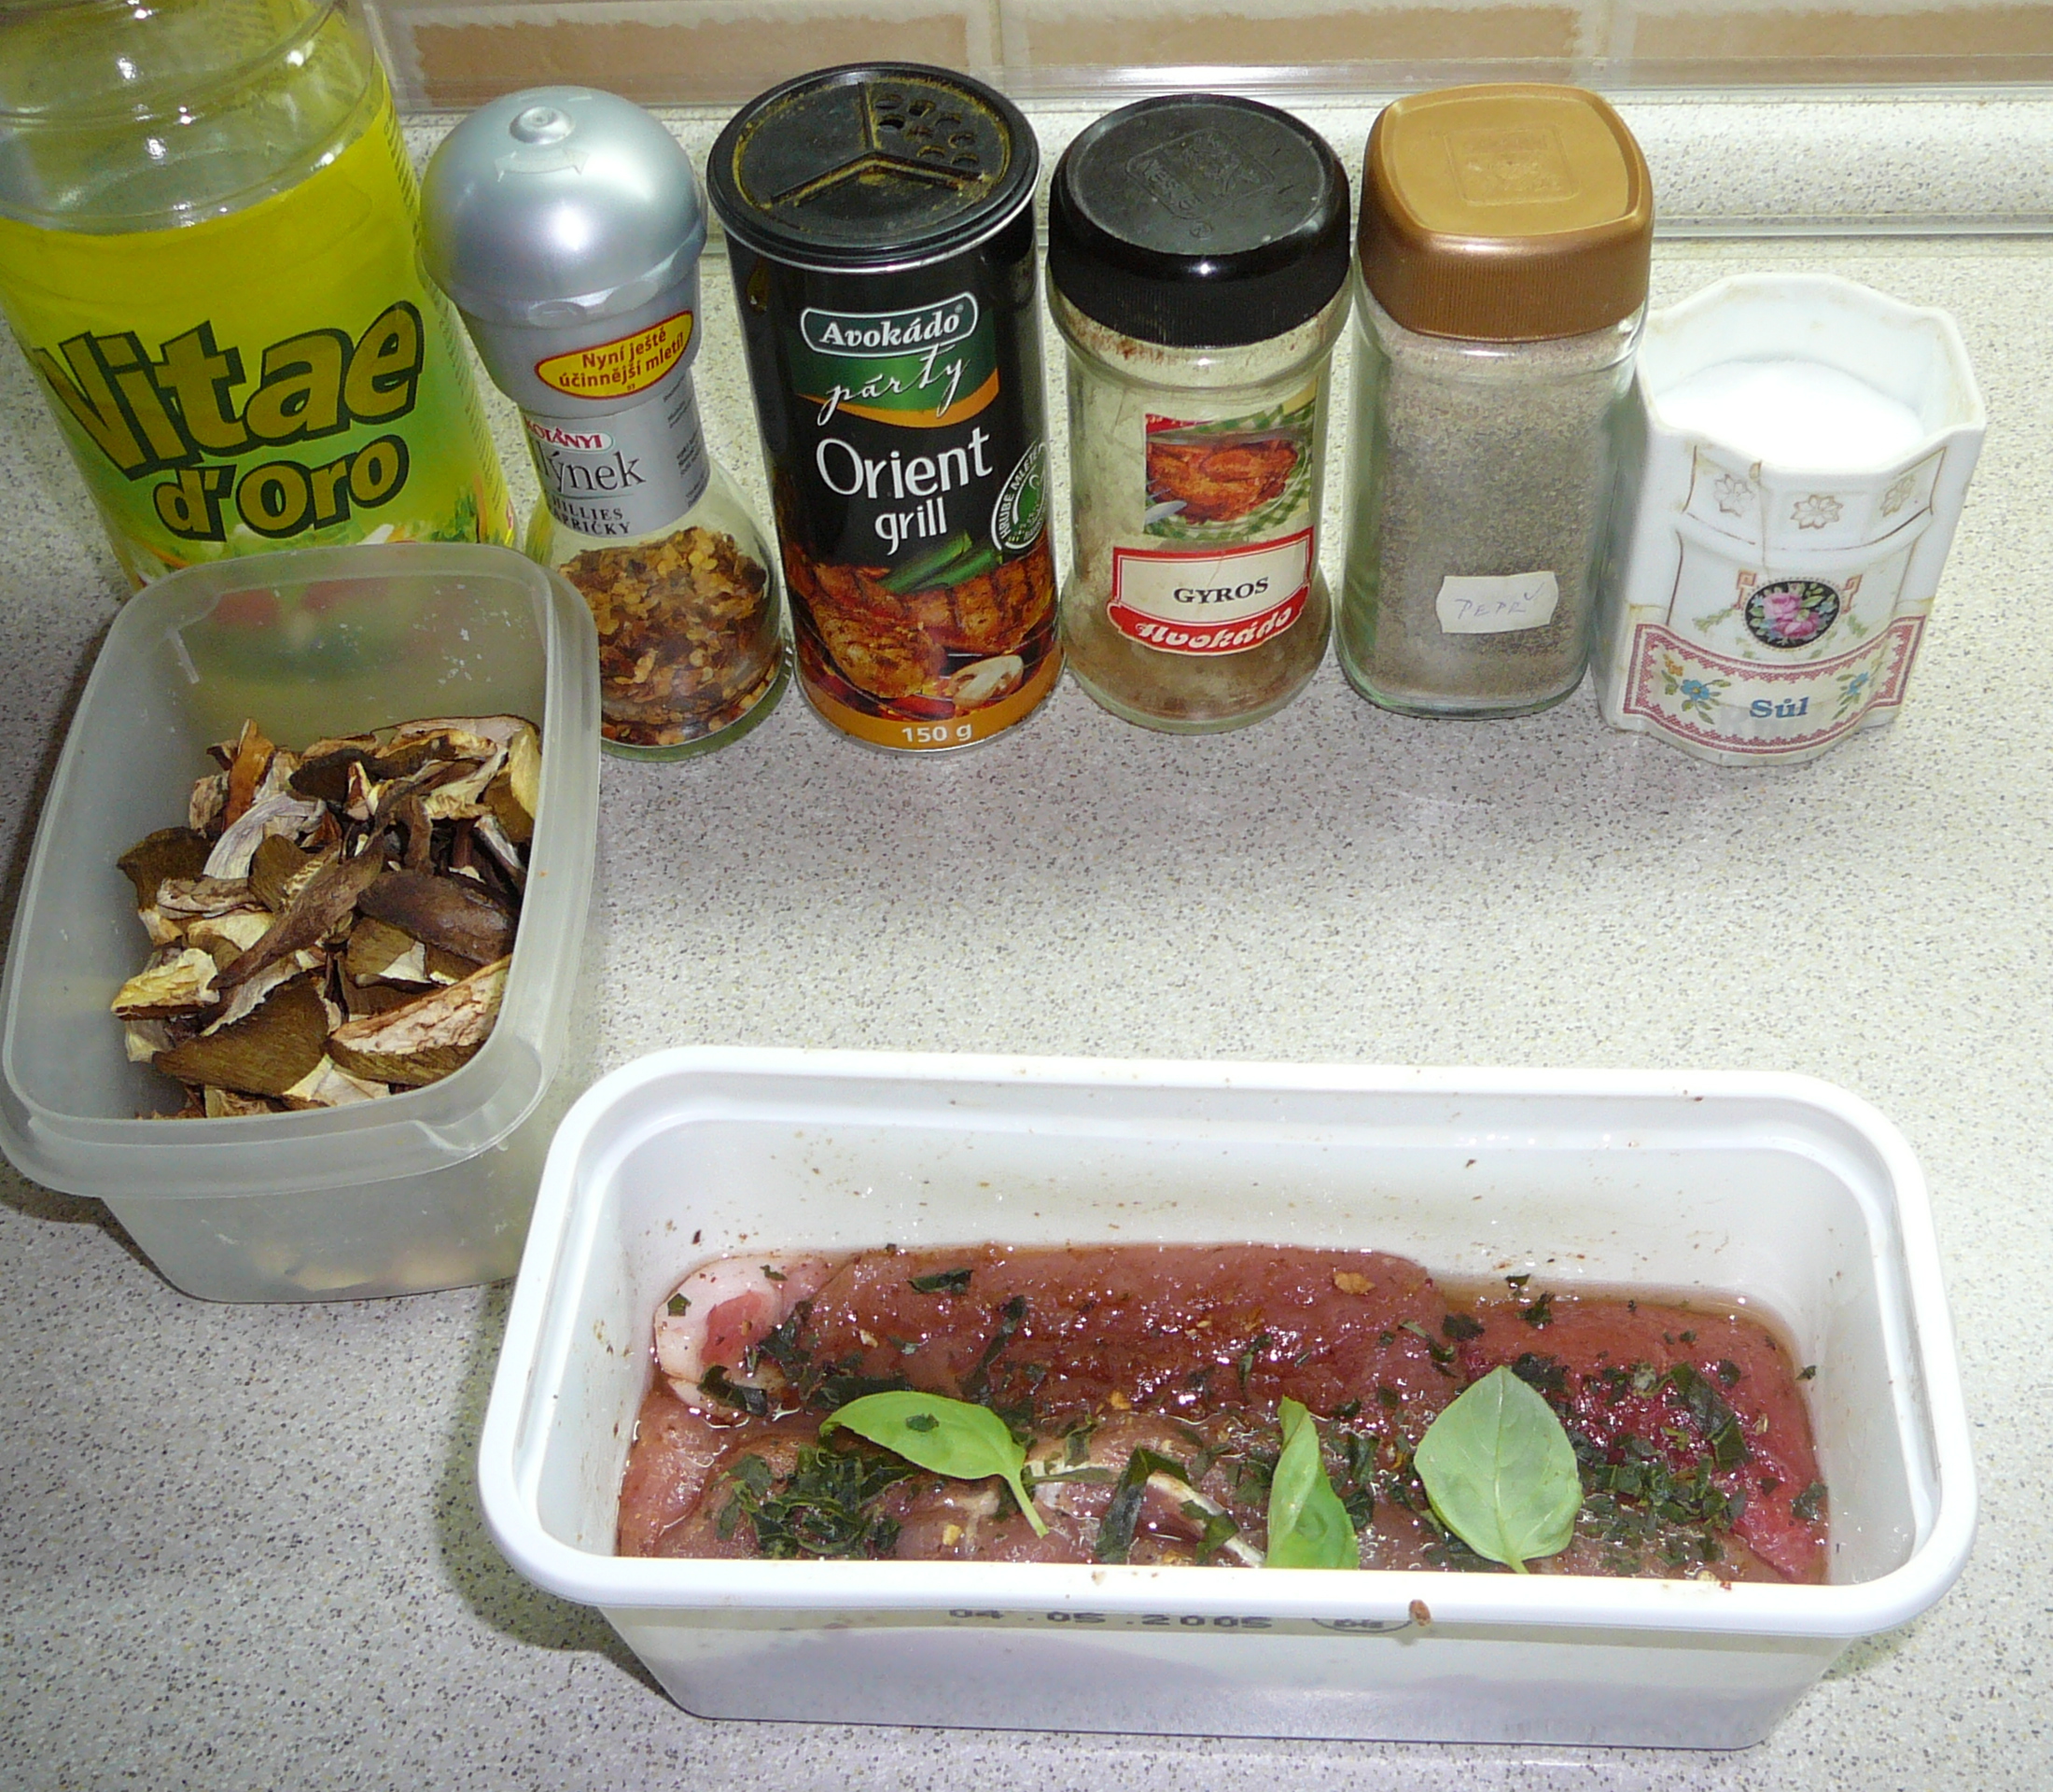 Soaked steaks with ingredients